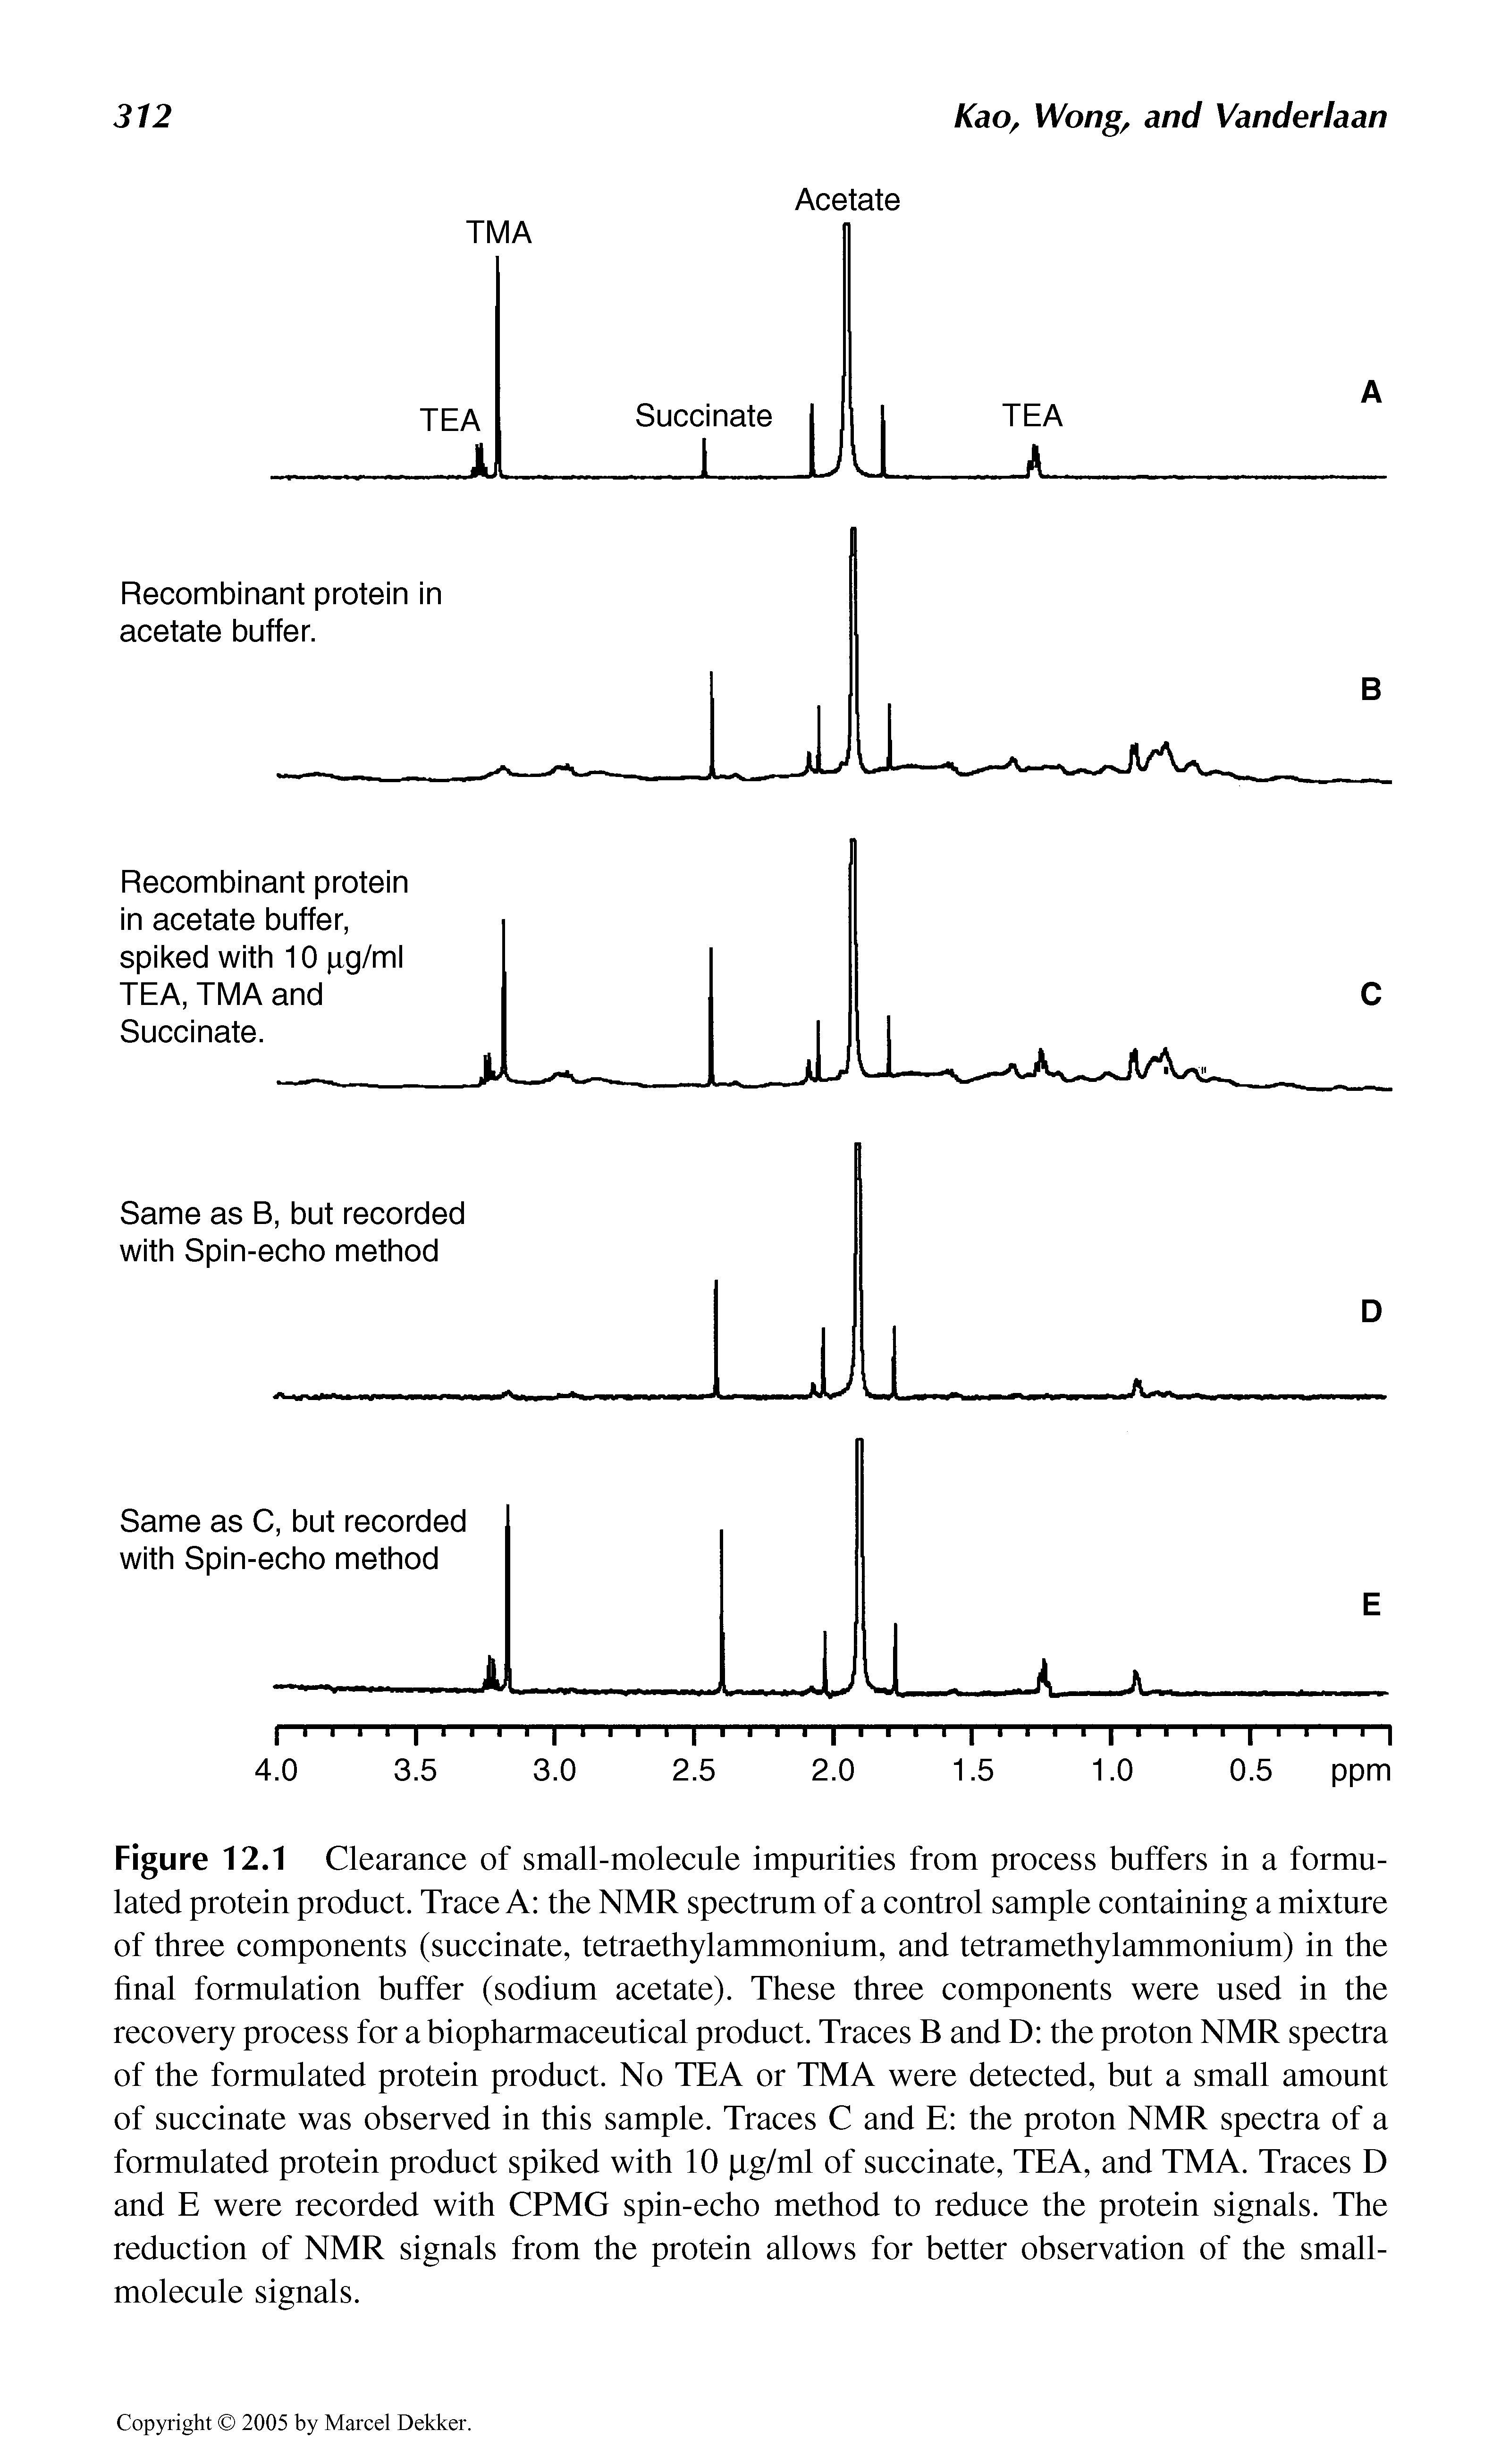 Figure 12.1 Clearance of small-molecule impurities from process buffers in a formulated protein product. Trace A the NMR spectrum of a control sample containing a mixture of three components (succinate, tetraethylammonium, and tetramethylammonium) in the final formulation buffer (sodium acetate). These three components were used in the recovery process for a biopharmaceutical product. Traces B and D the proton NMR spectra of the formulated protein product. No TEA or TMA were detected, but a small amount of succinate was observed in this sample. Traces C and E the proton NMR spectra of a formulated protein product spiked with 10 jag/ml of succinate, TEA, and TMA. Traces D and E were recorded with CPMG spin-echo method to reduce the protein signals. The reduction of NMR signals from the protein allows for better observation of the small-molecule signals.